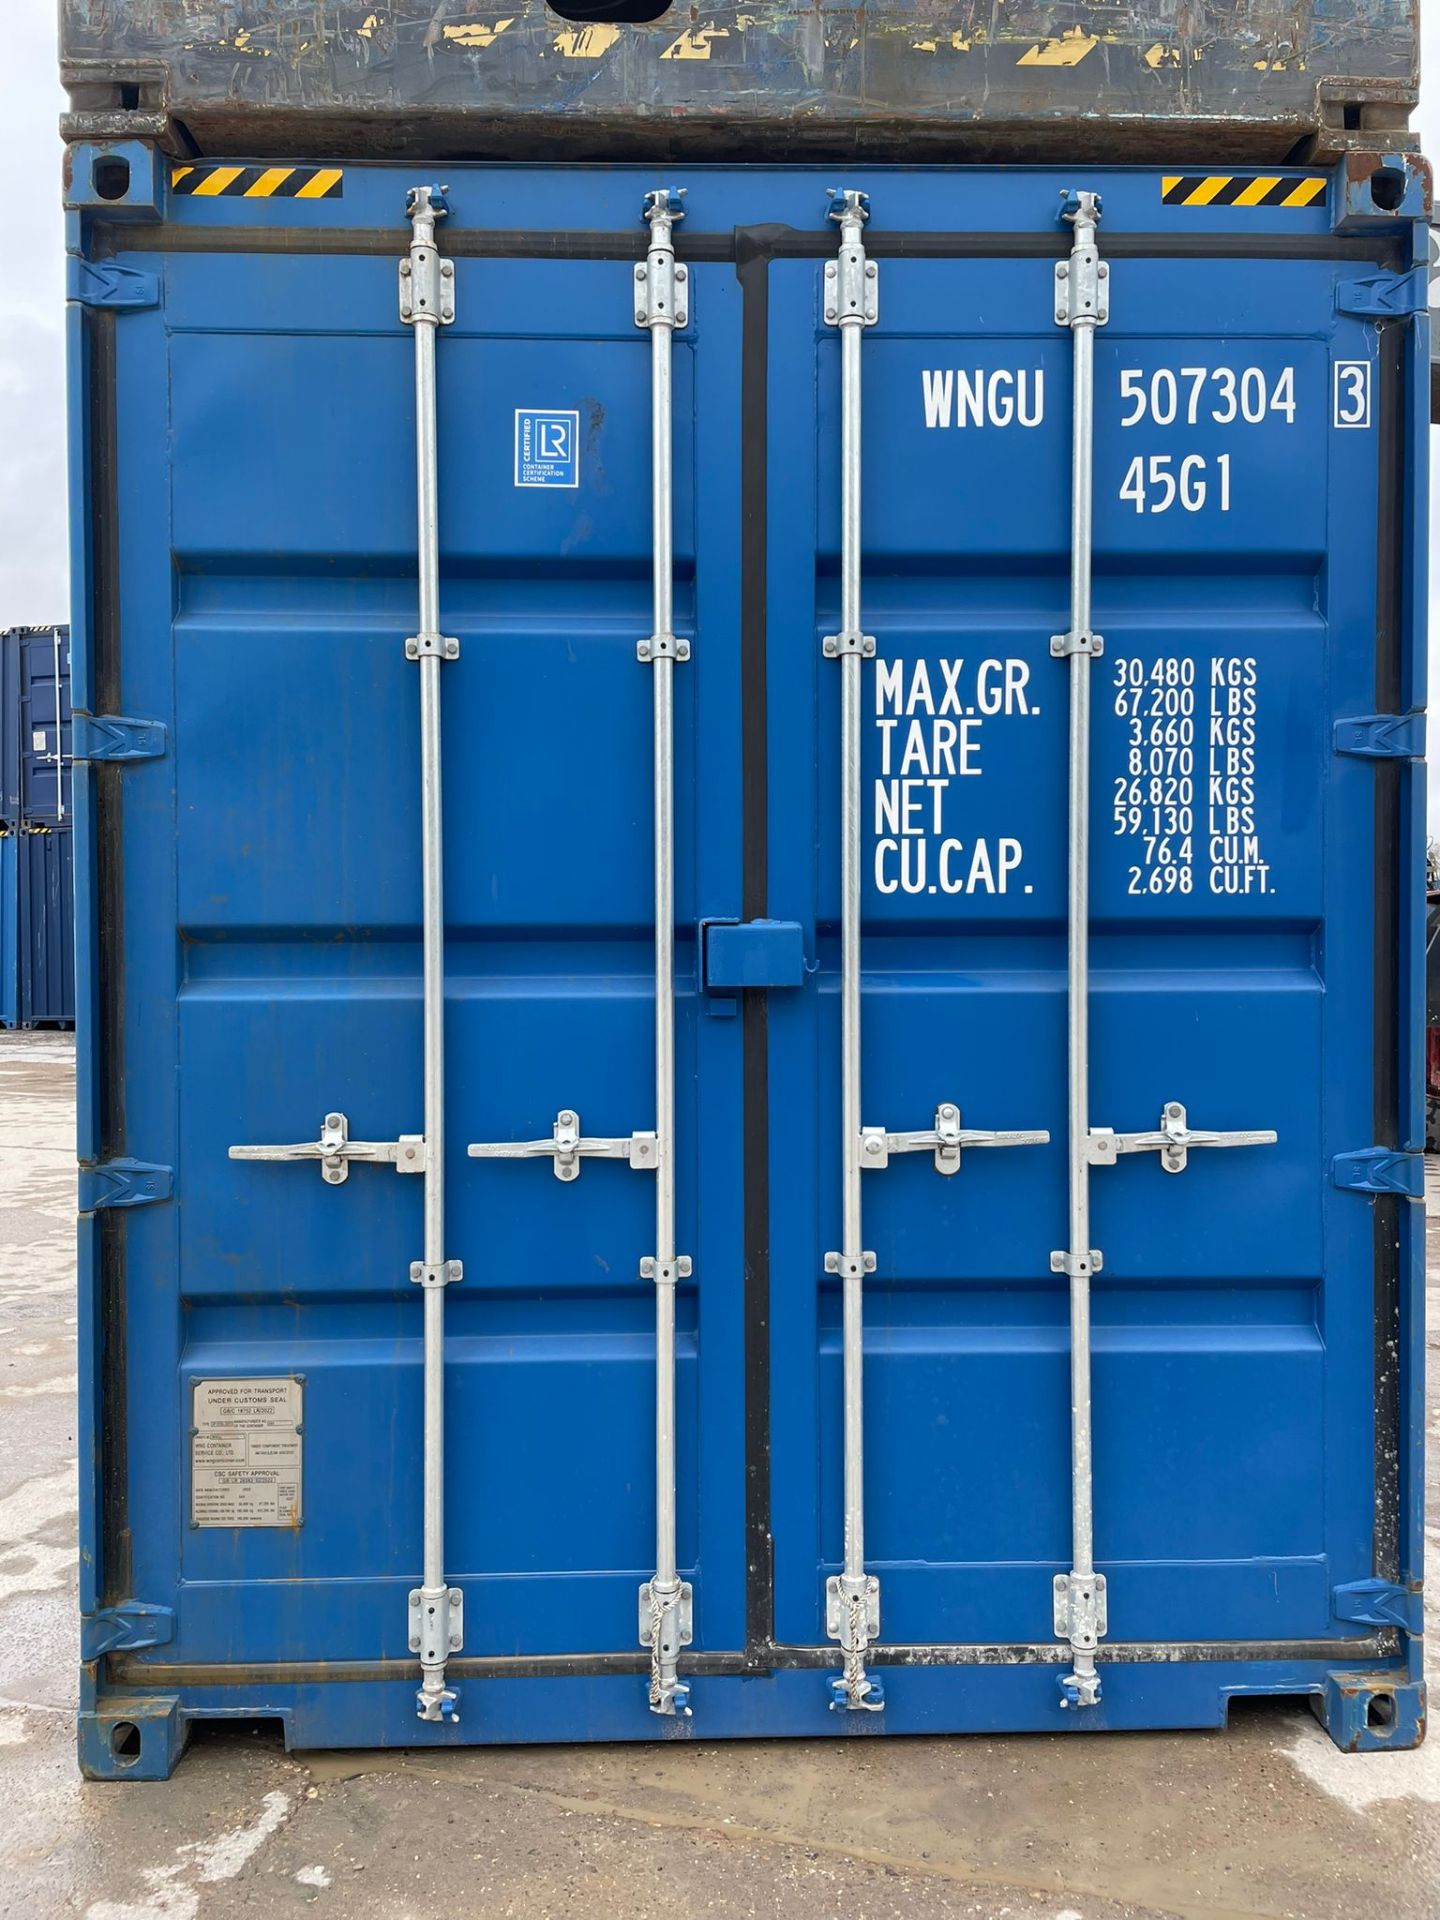 40ft HC Shipping Container - ref WNGU5073043 - NO RESERVE